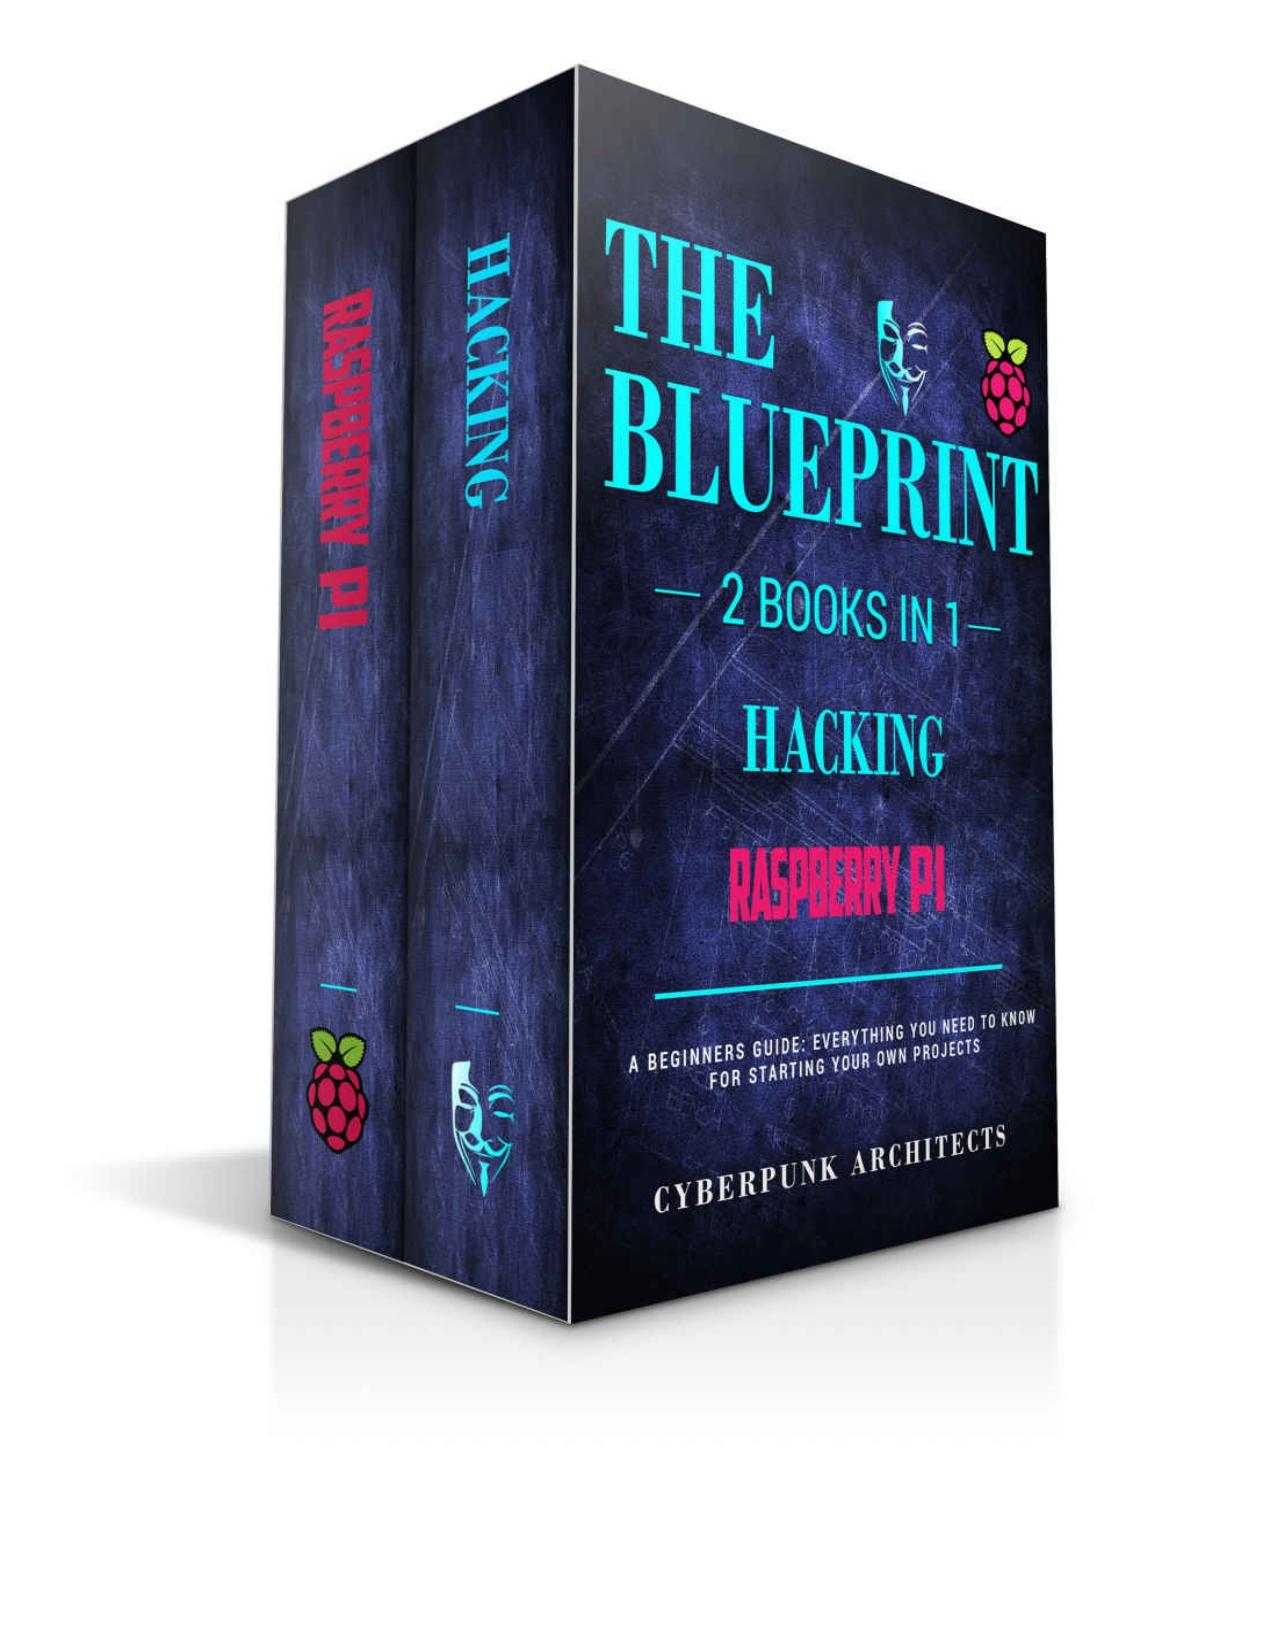 RASPBERRY PI & HACKING: 2 Books in 1: THE BLUEPRINT: Everything You Need To Know (CyberPunk Blueprint Series) by CyberPunk Architects